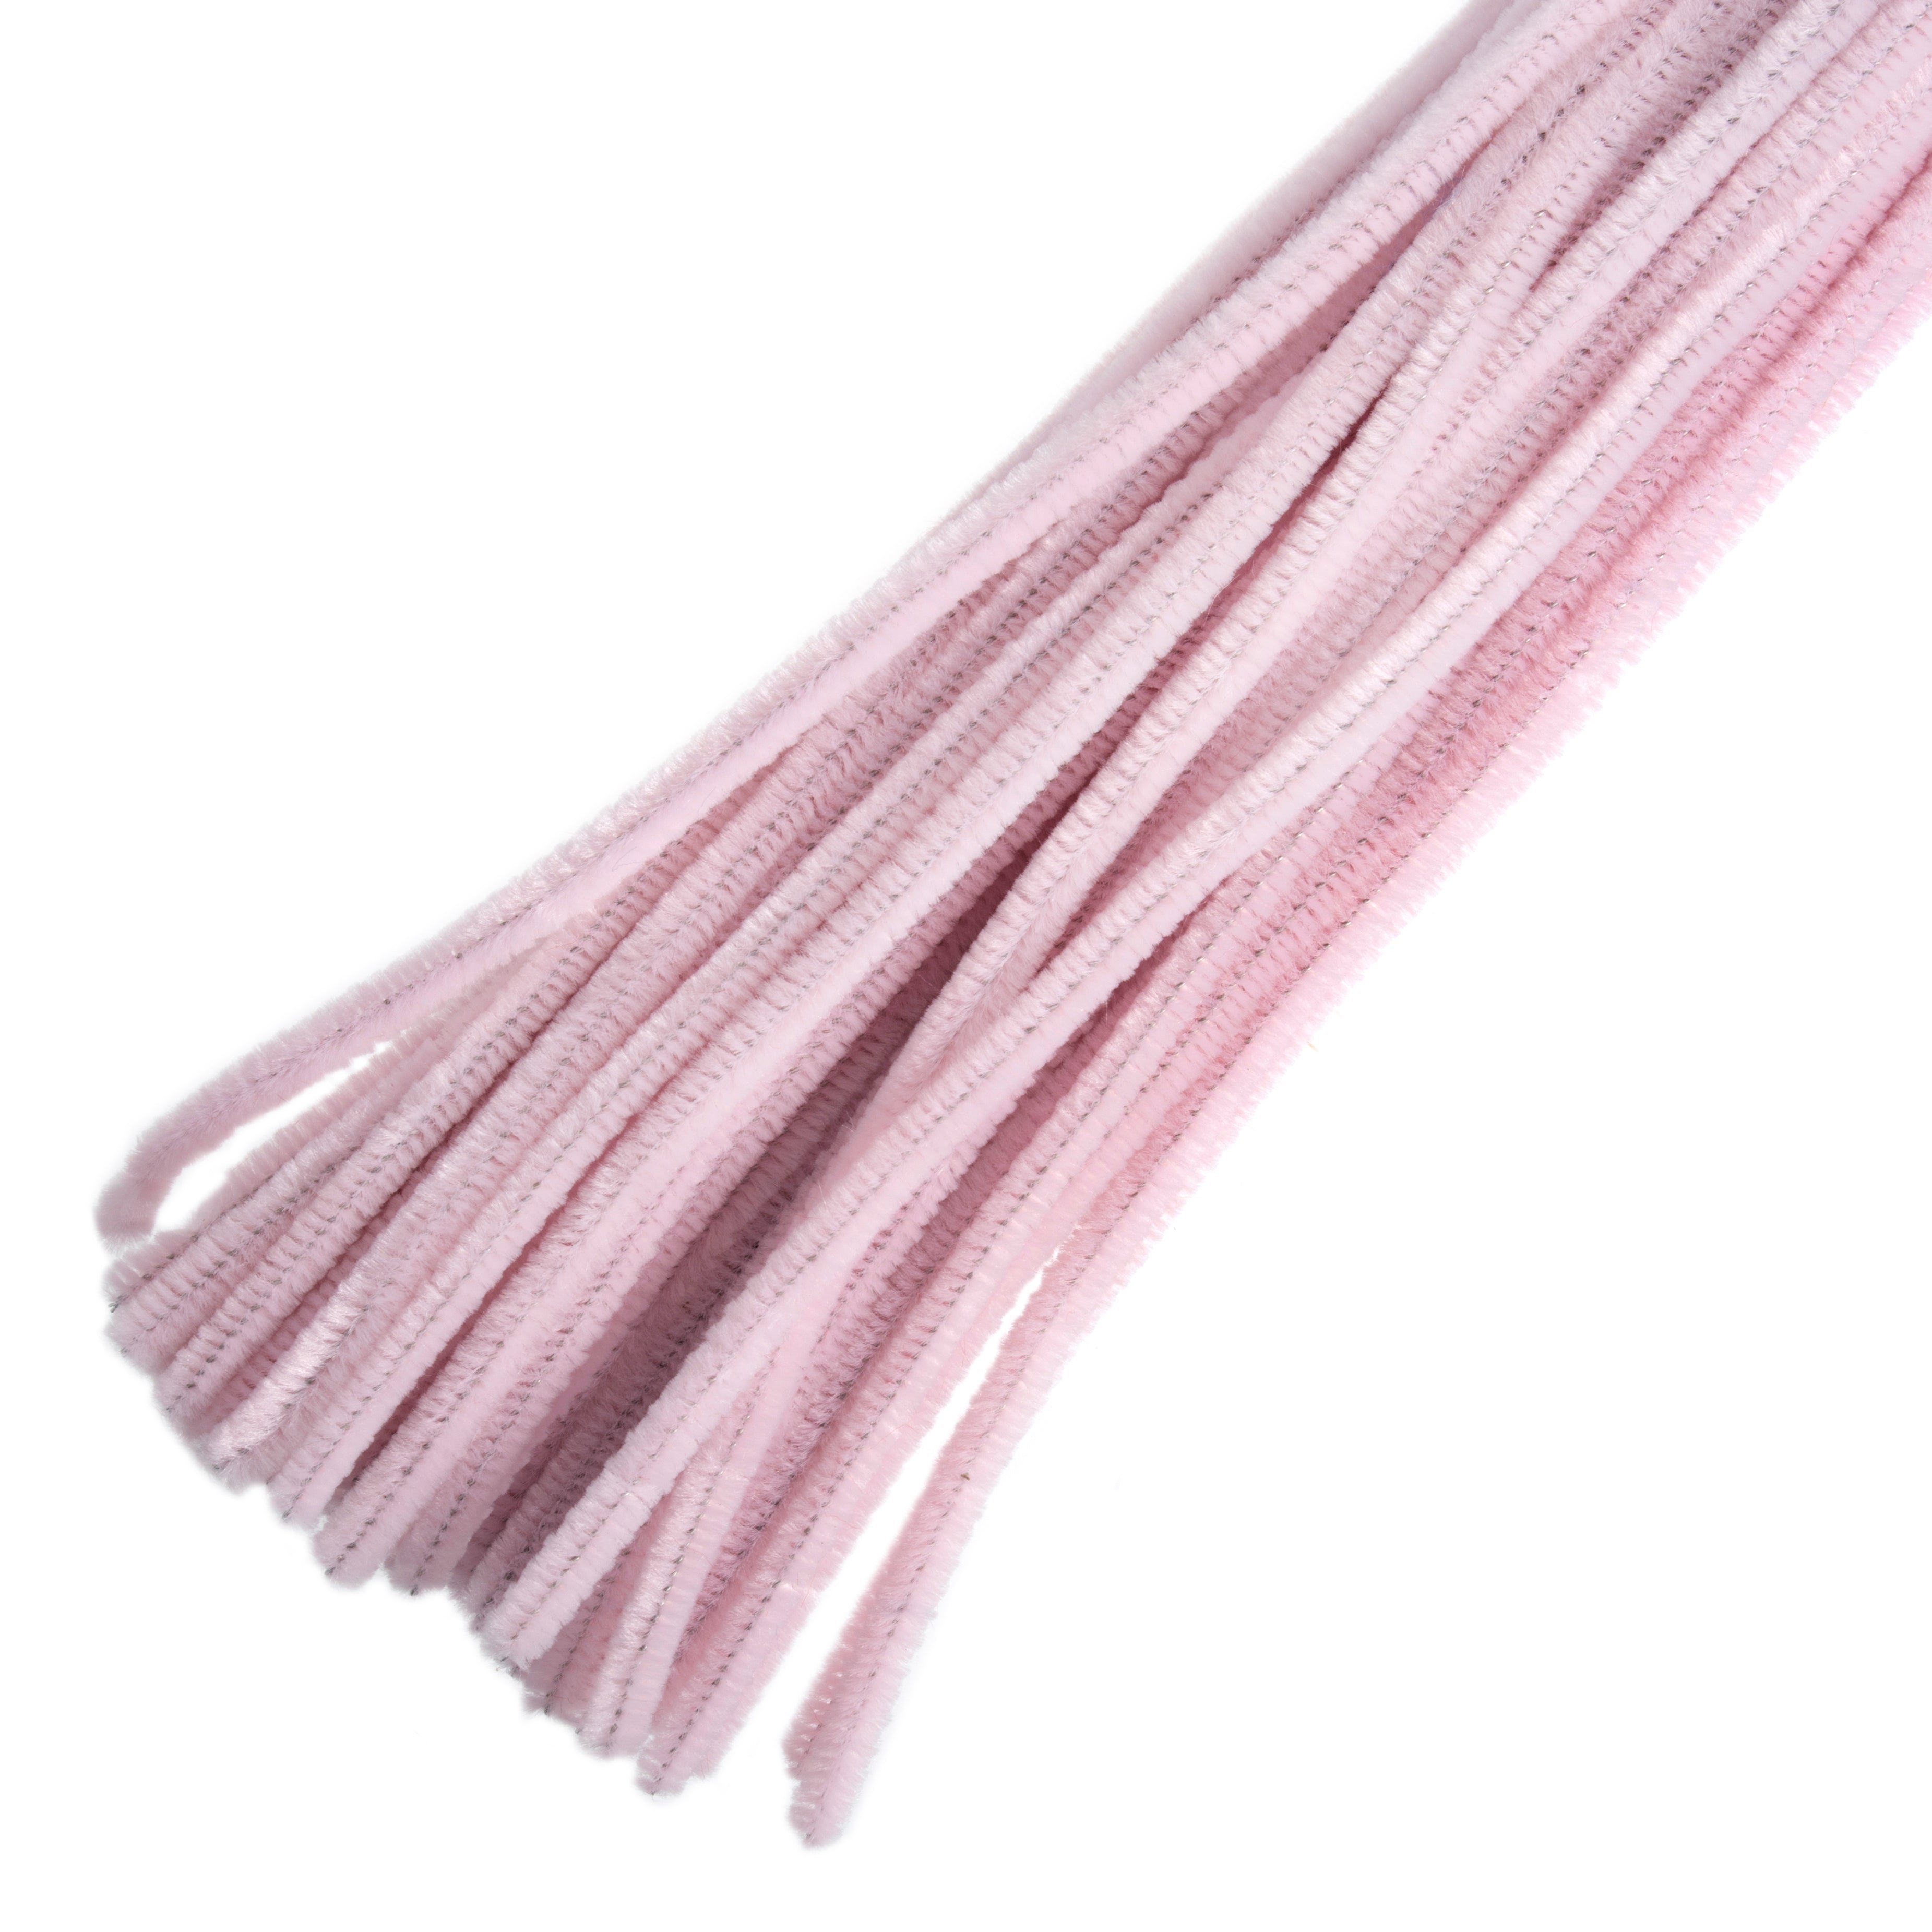 Chenille Stems / Pipe Cleaners: 30pk